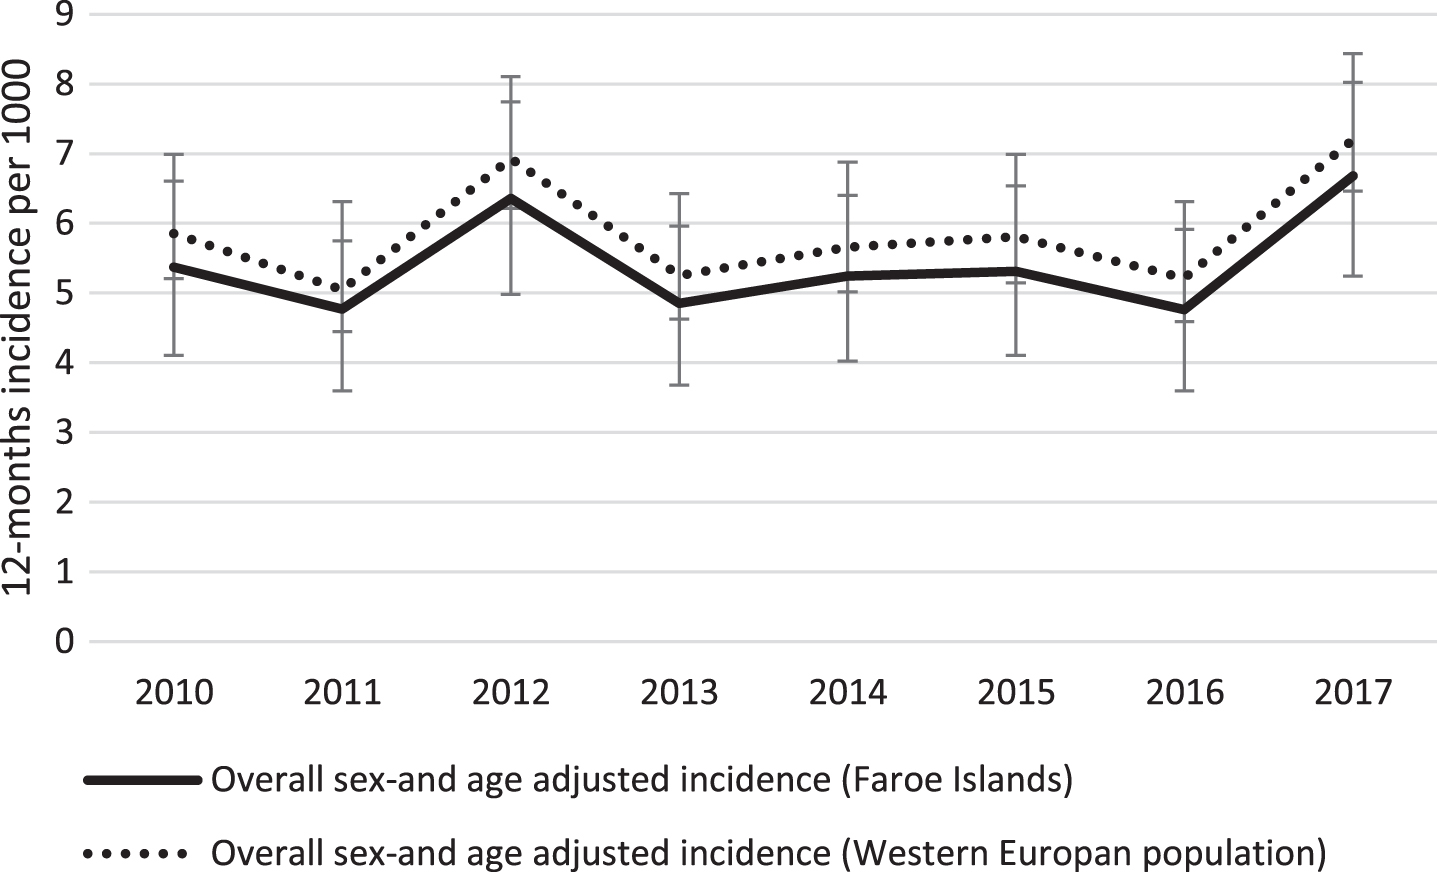 Time trend in age-and sex standardized incidence of dementia in the Faroe Islands from 2010 to 2017. The Faroese estimates are standardized to the 2010 Faroese and Western European populations, respectively. Error bars represent 95% confidence intervals.